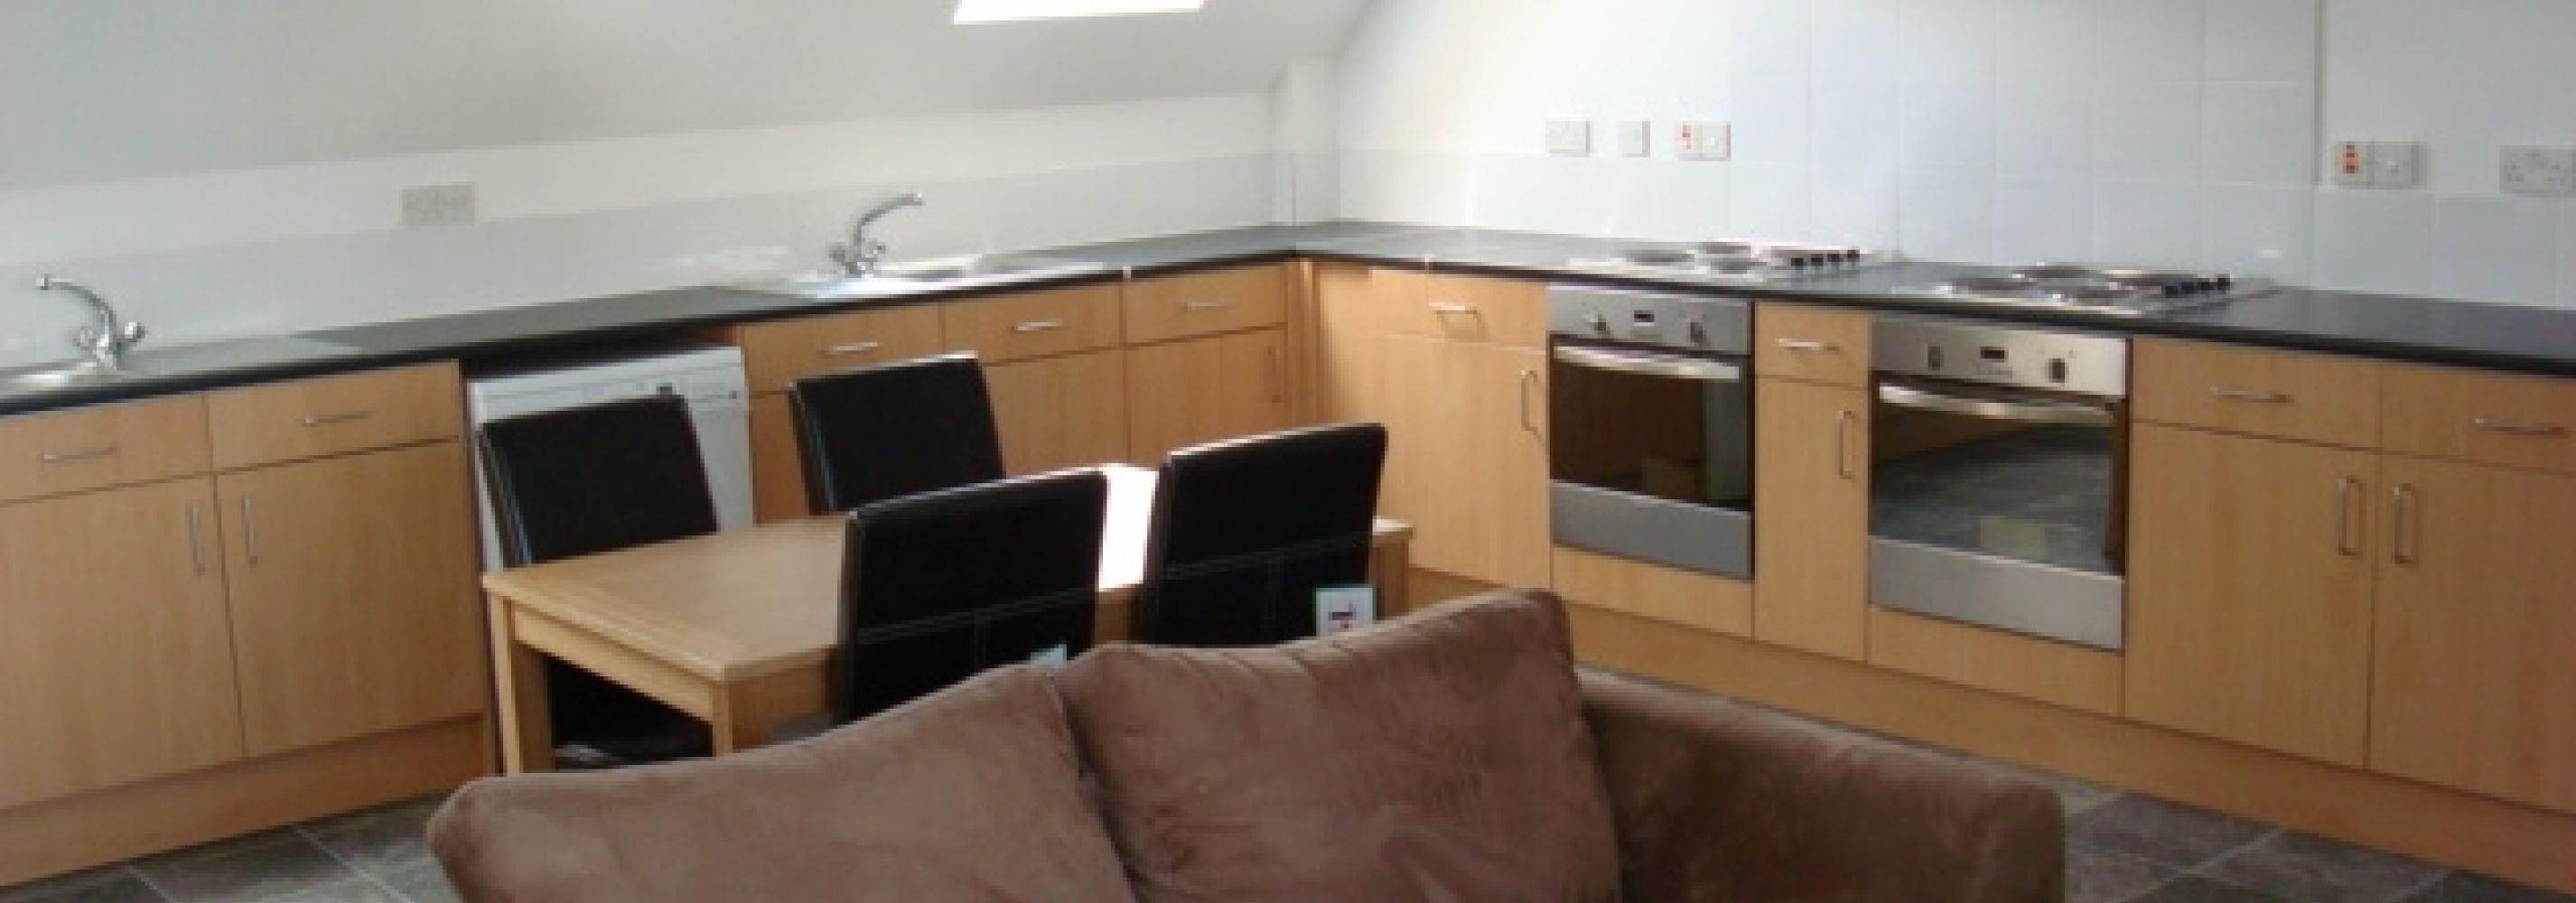 Shared kitchen, brown sofa, 2 hobs, 2 extractor fans, window, cupboards and sink